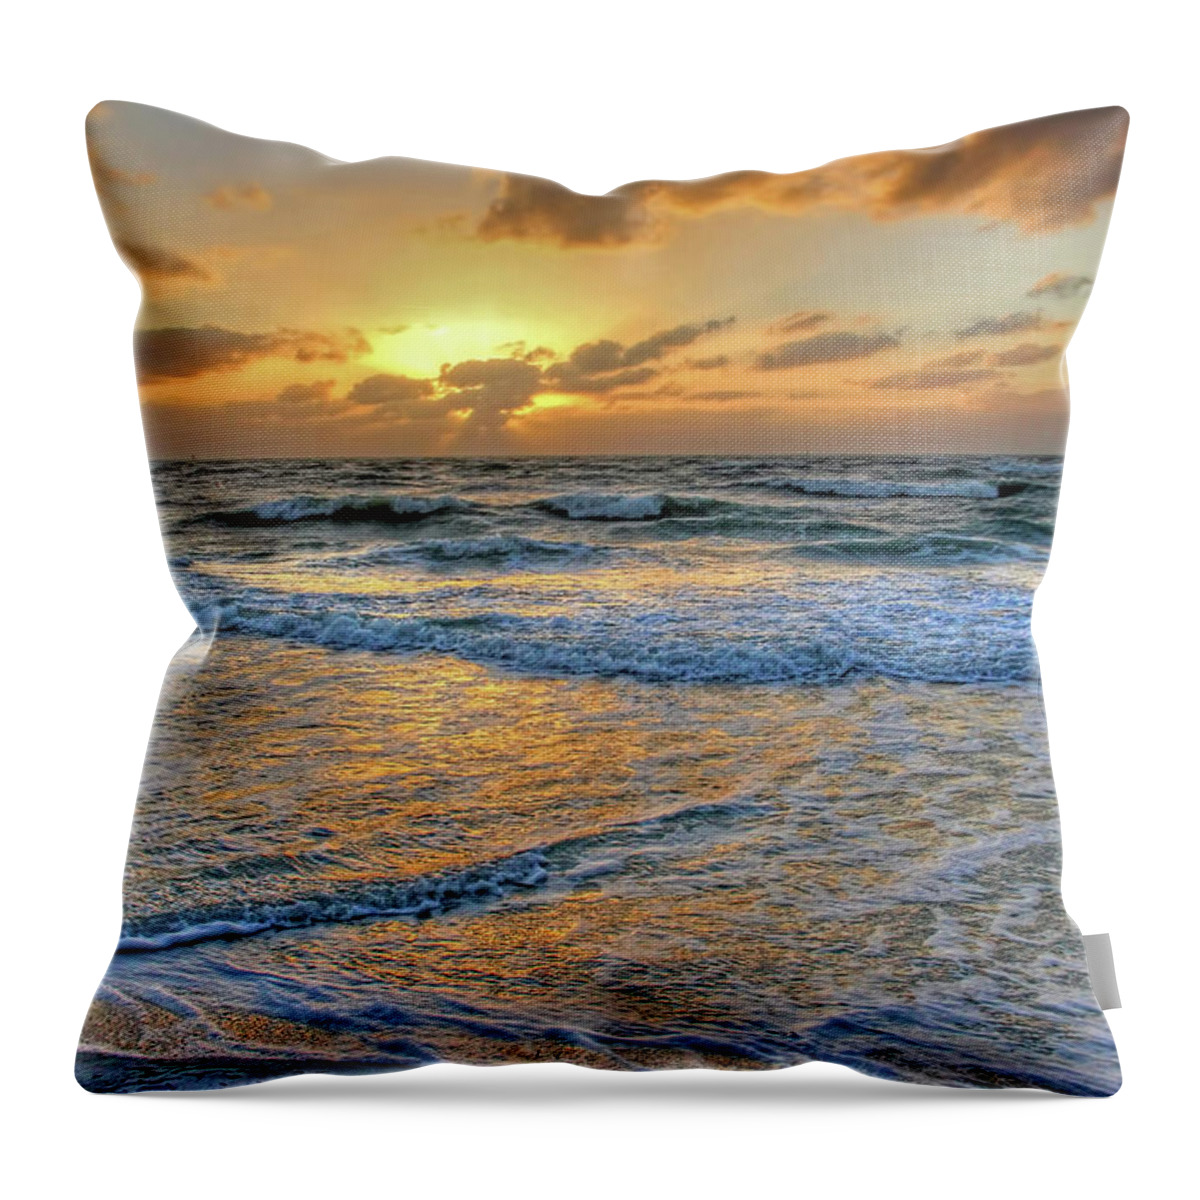 Gulf Of Mexico Throw Pillow featuring the photograph Restless by HH Photography of Florida